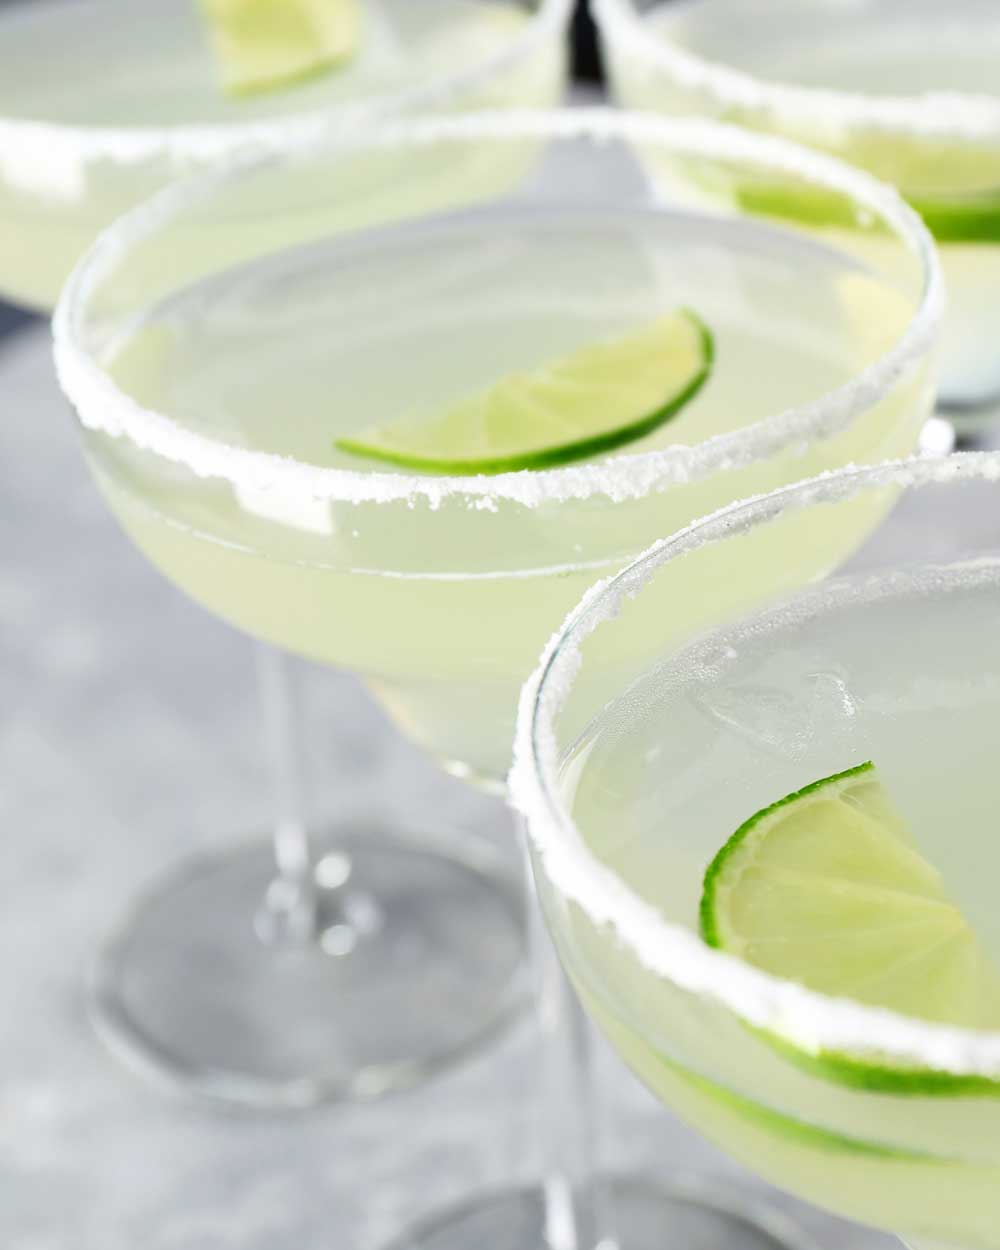 Margarita mocktail garnished with lime and made using Ms Sans margarita